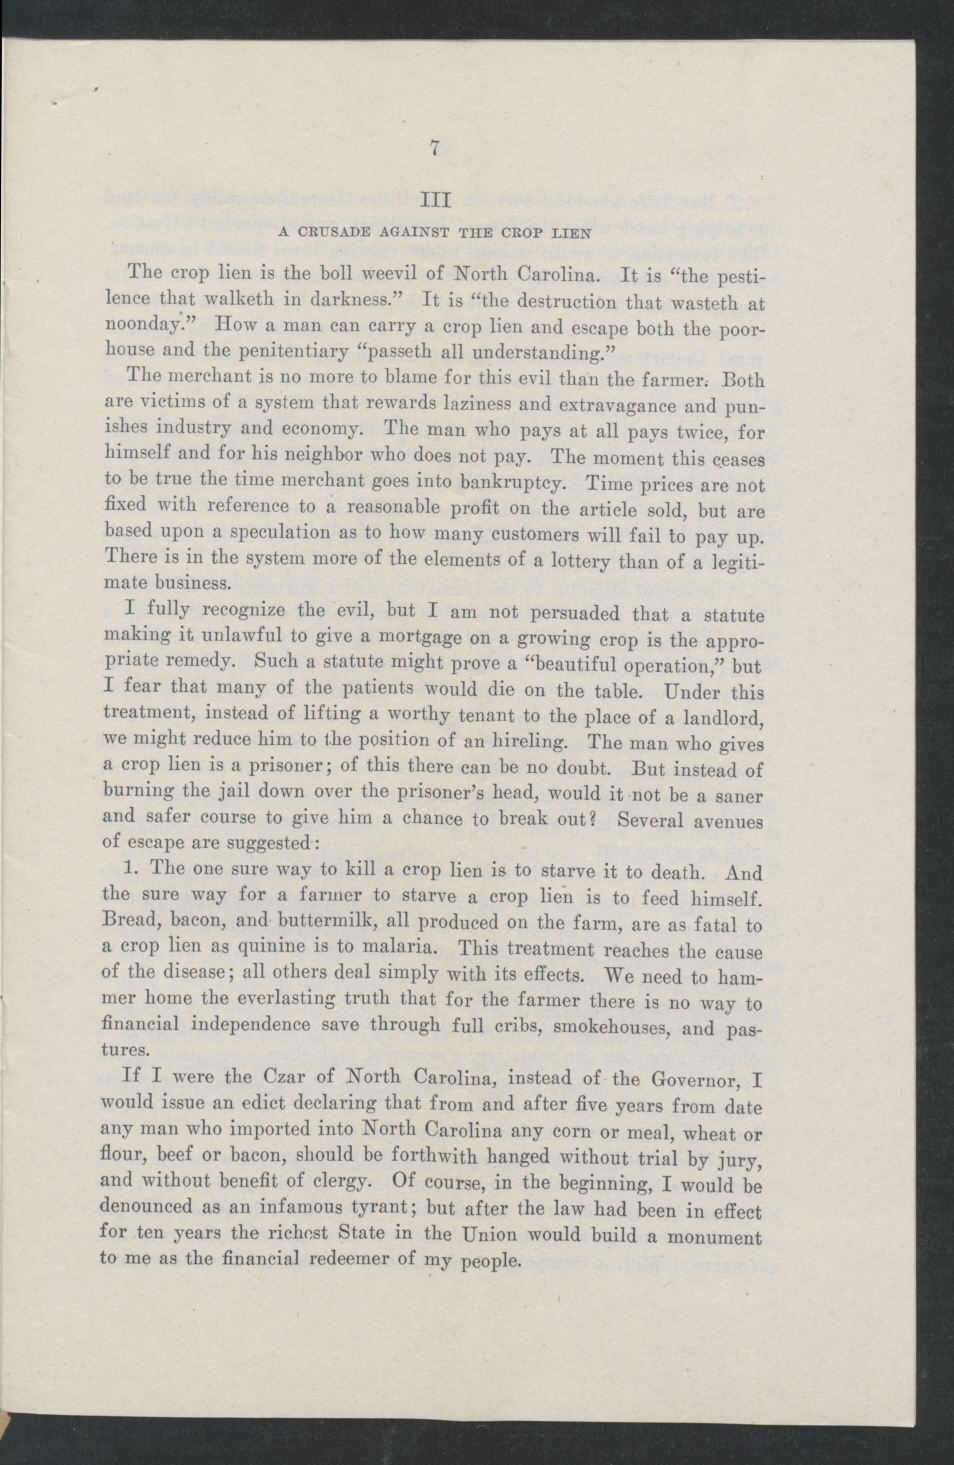 Inaugural Address of Governor Thomas W. Bickett to the General Assembly, January 11, 1917, page 5